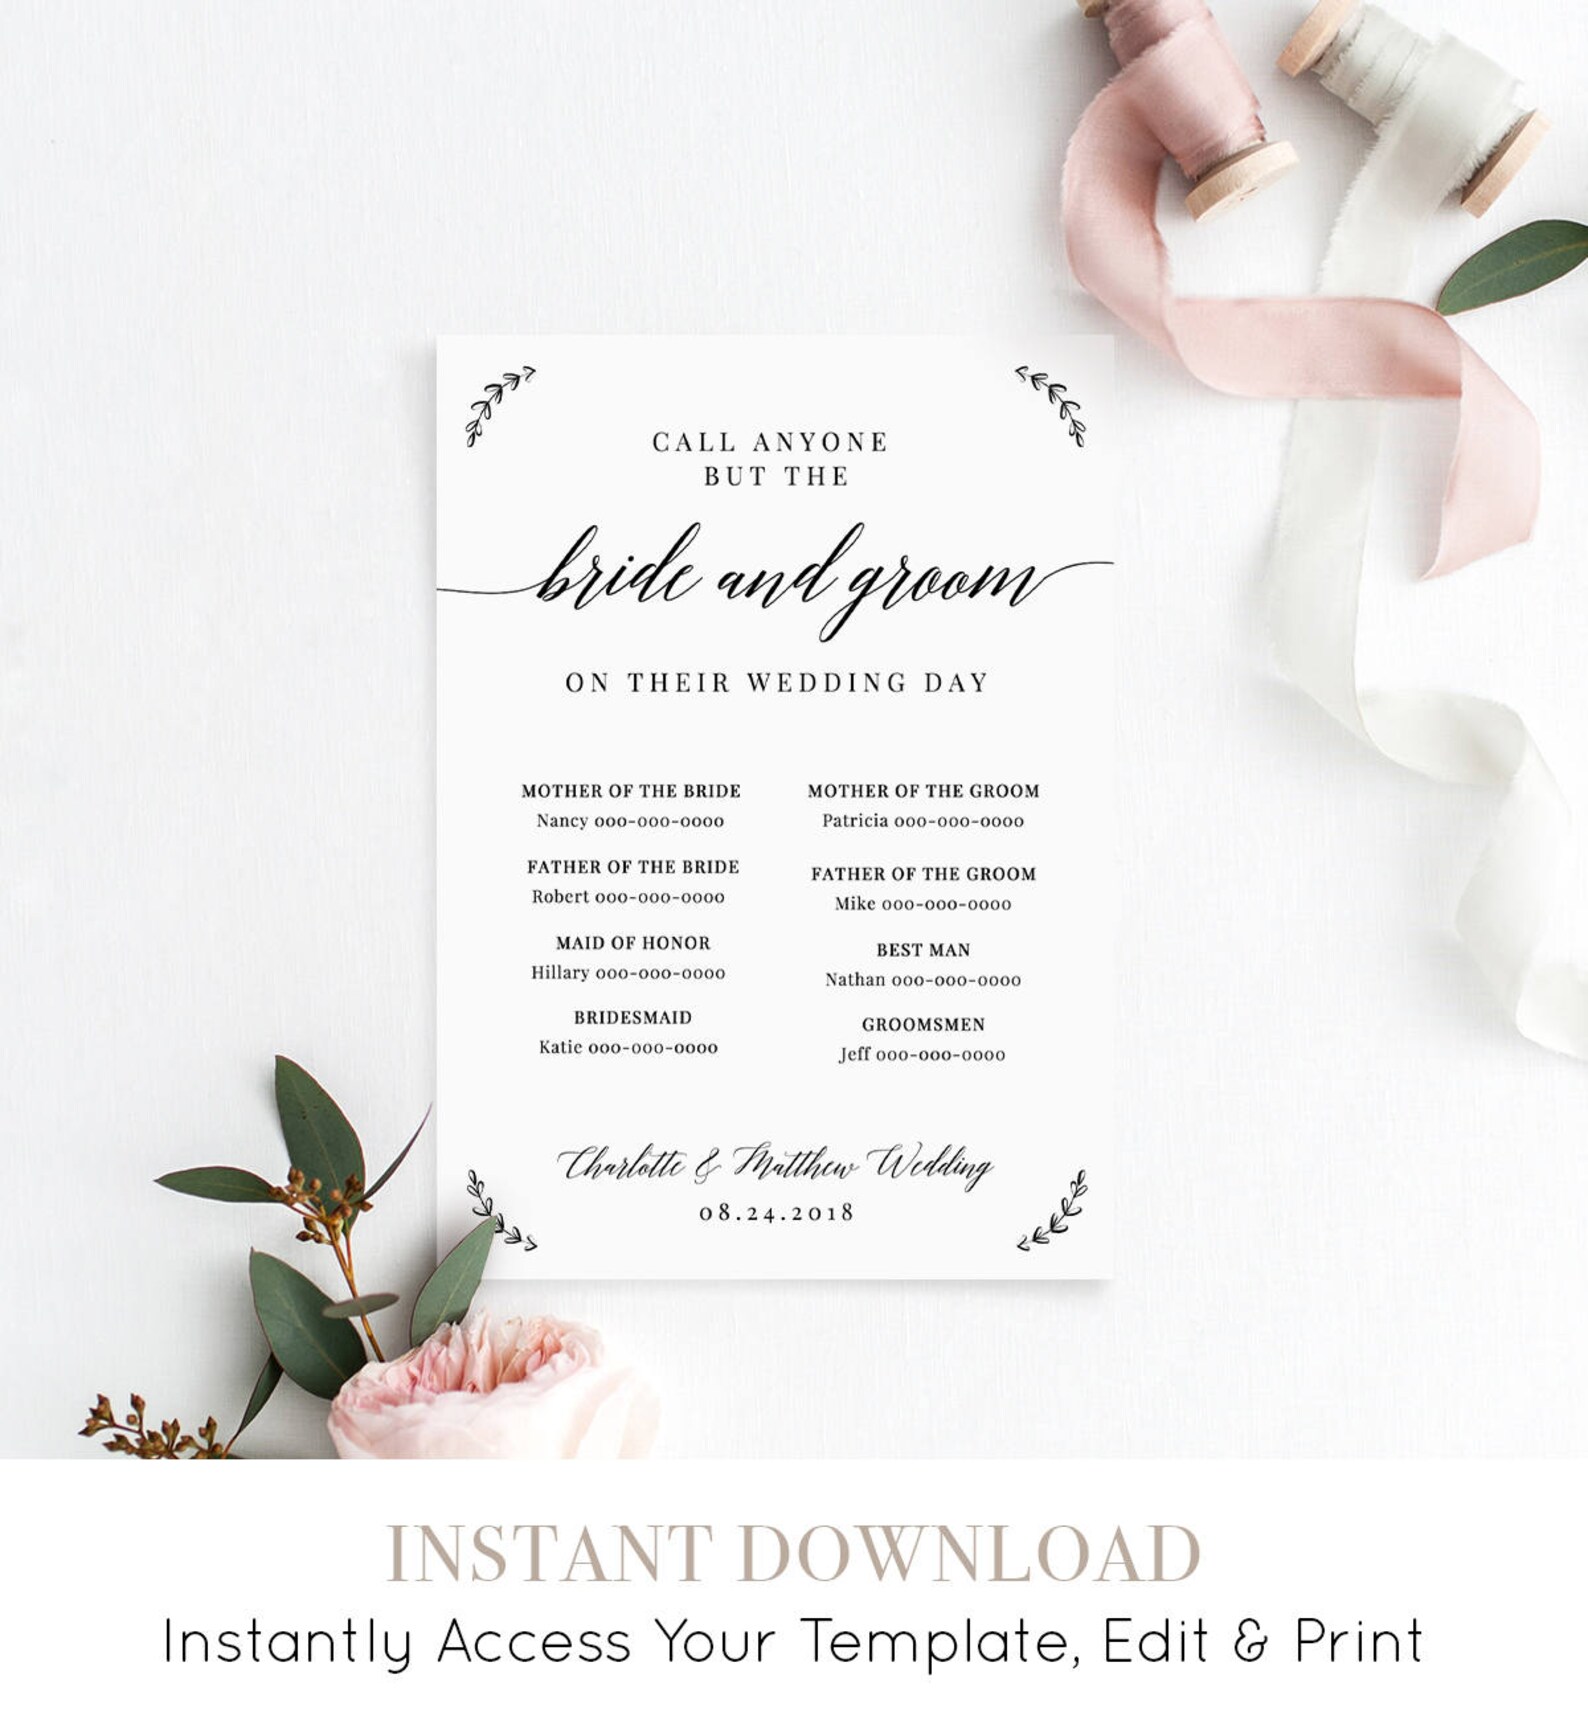 Call Anyone but the Bride Template Wedding Contact Contact | Etsy